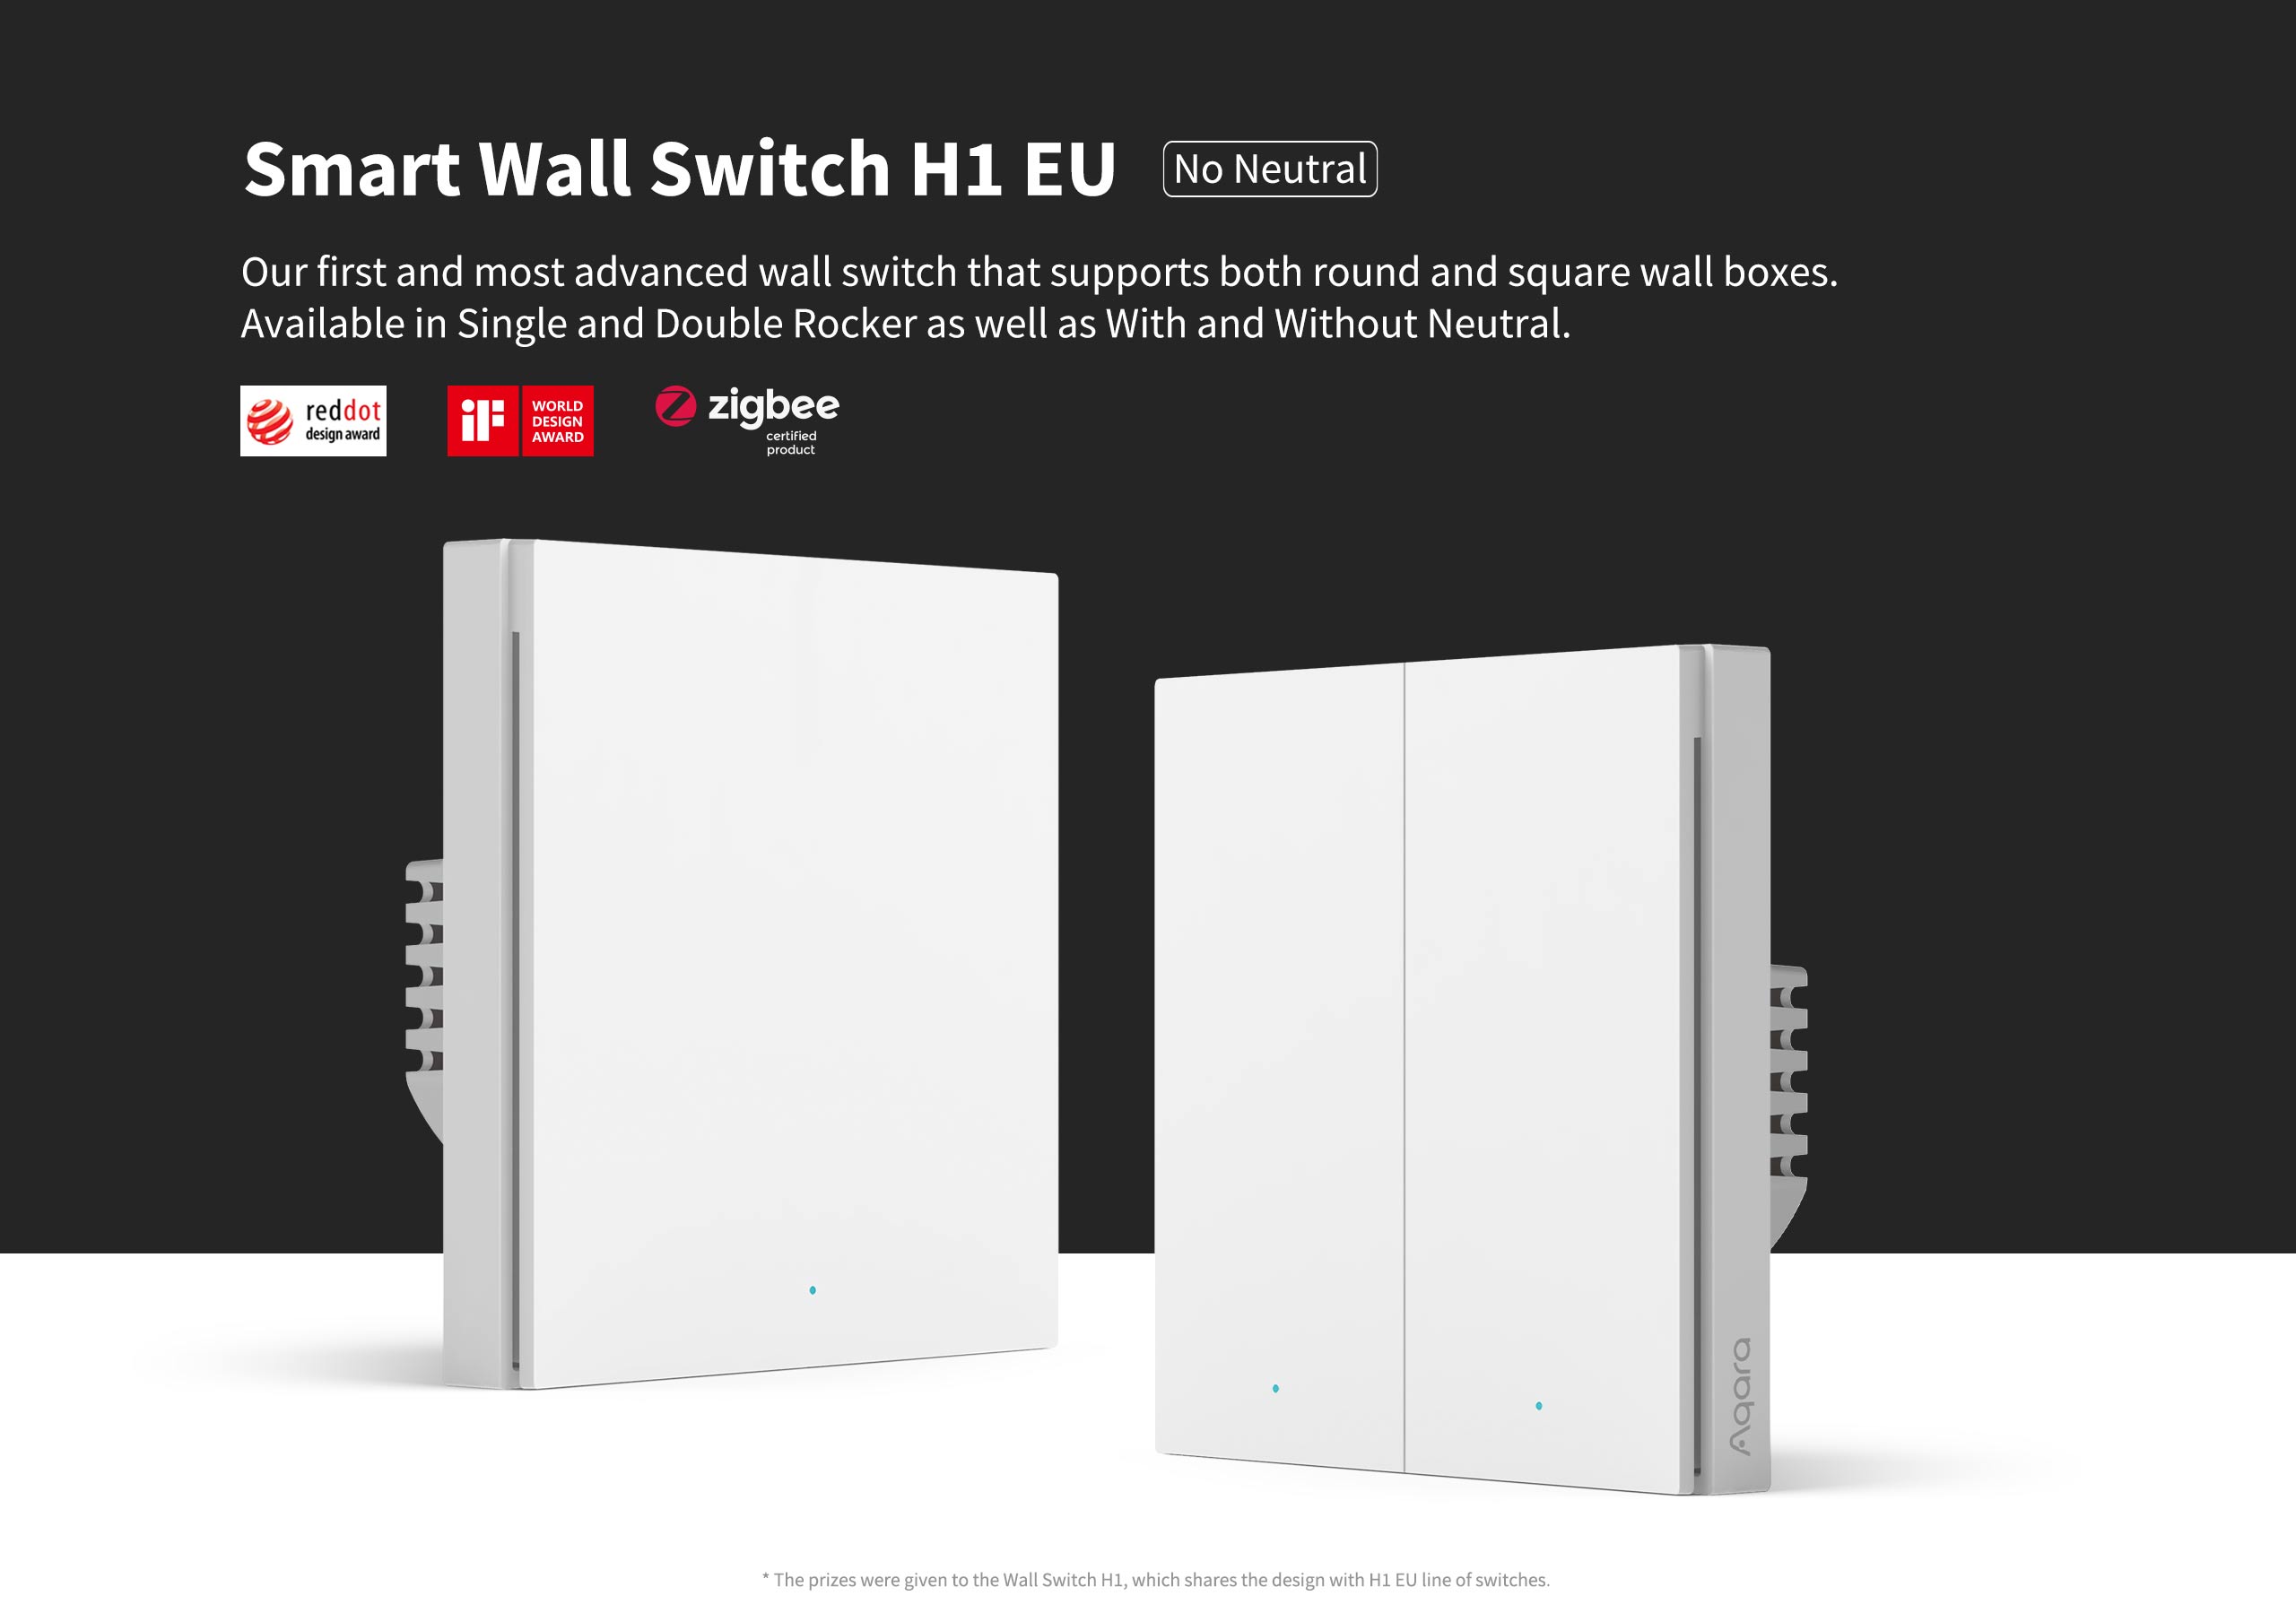 Smart Wall Switch H1 No Neutral pc 01 Aqara Smart Light Switch (No Neutral, Double Rocker), Requires AQARA HUB, Zigbee Light Switch, Remote Control and Smart Home Automation